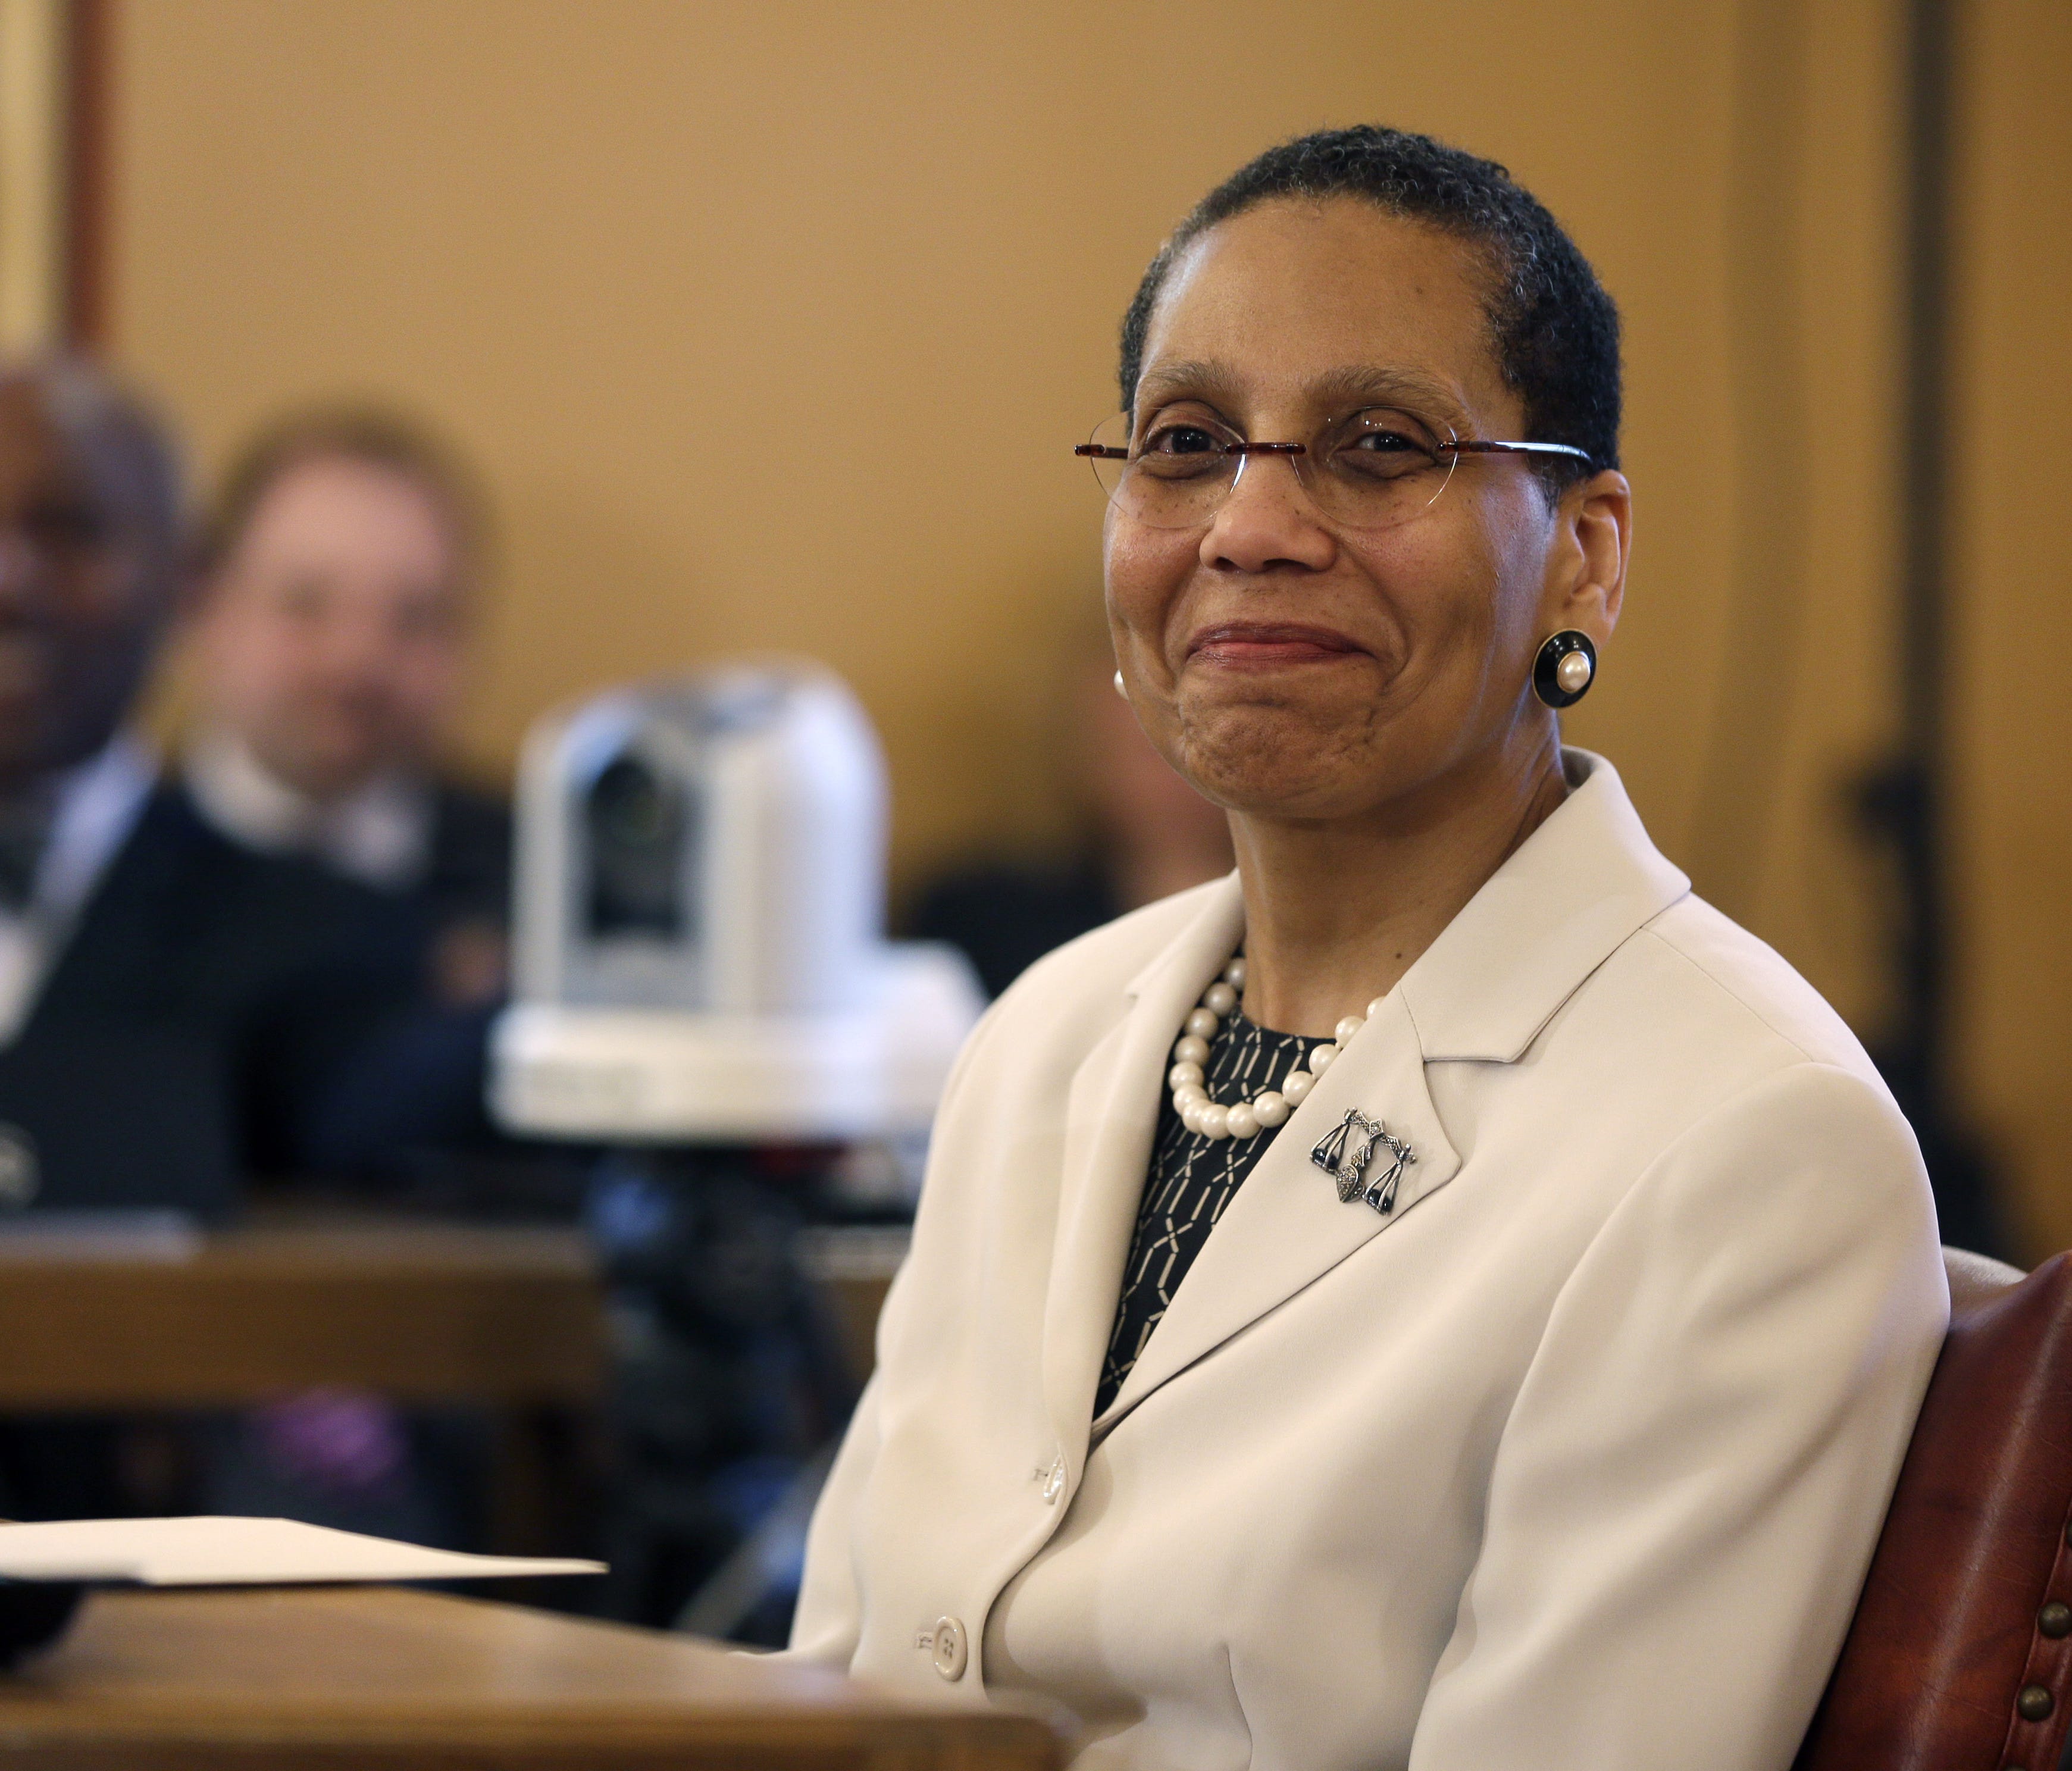 In this April 30, 2013, file photo, Justice Sheila Abdus-Salaam looks on as members of the state Senate Judiciary Committee vote unanimously to advance her nomination to fill a vacancy on the Court of Appeals at the Capitol in Albany, N.Y.